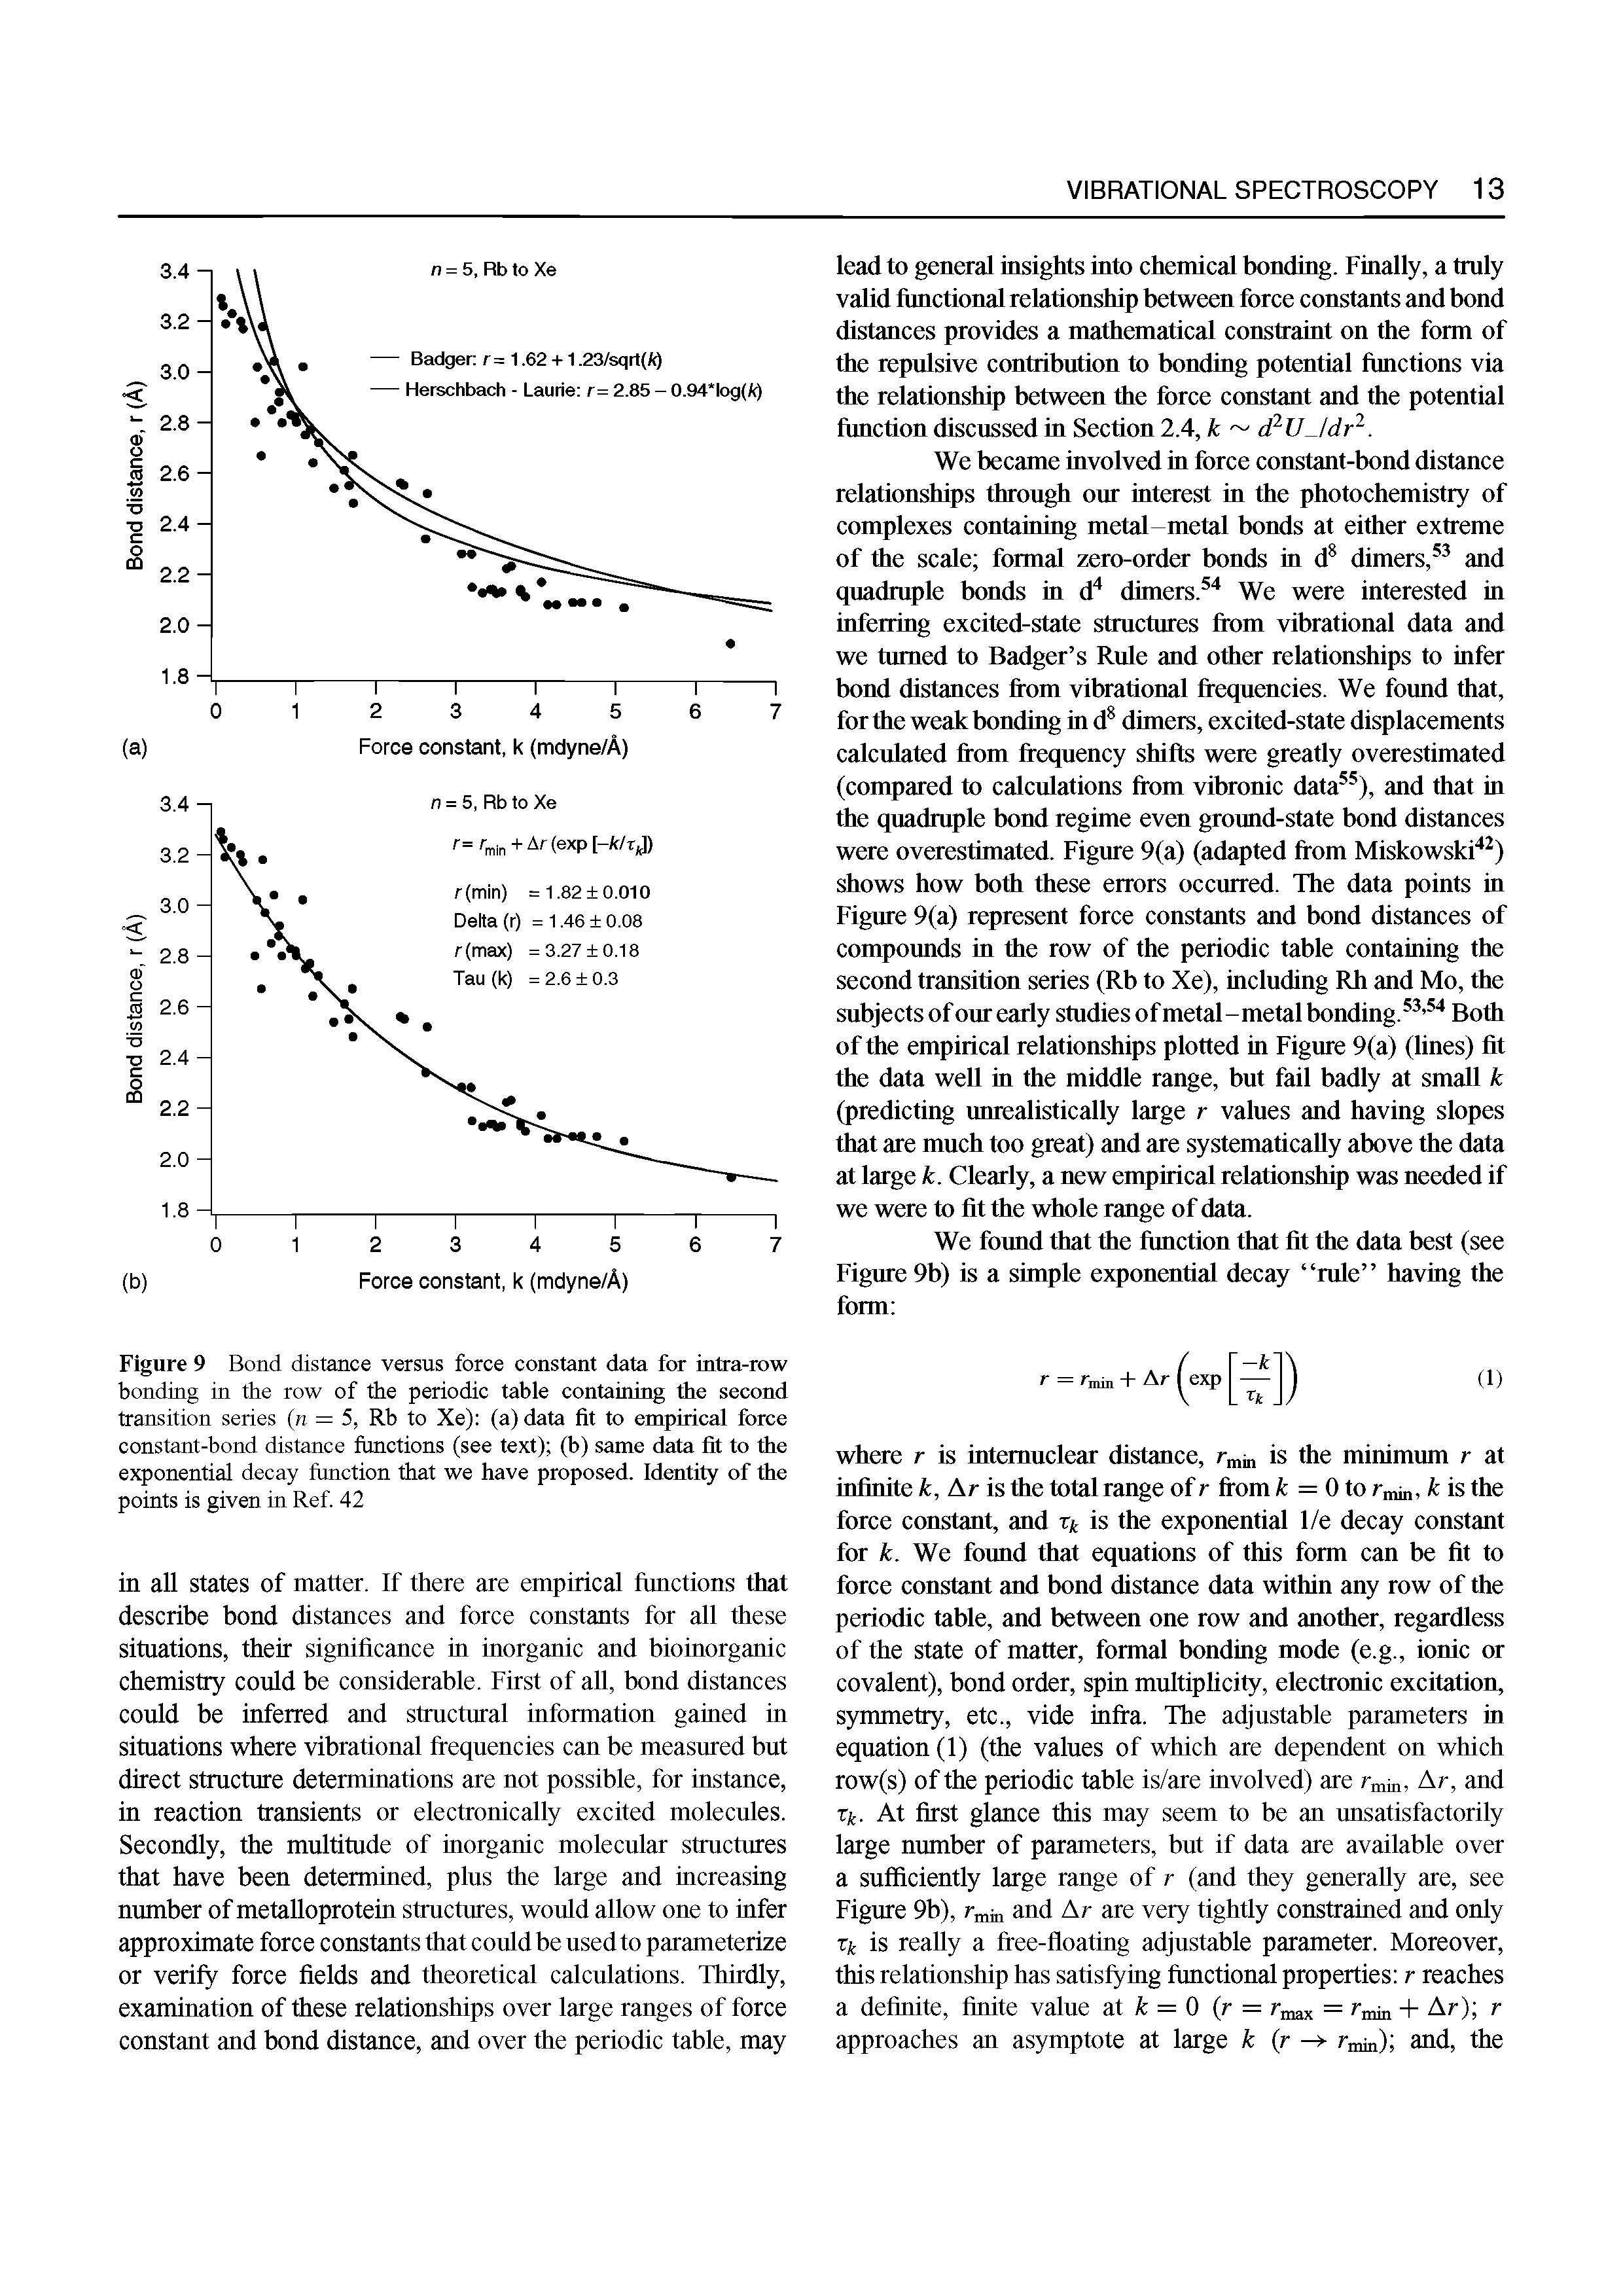 Figure 9 Bond distance versus force constant data for intra-row bonding in the row of the periodic table containing the second transition series (n = 5, Rb to Xe) (a) data fit to empirical force constant-bond distance functions (see text) (b) same data fit to the exponential decay function that we have proposed. Identity of the points is given in Ref. 42...